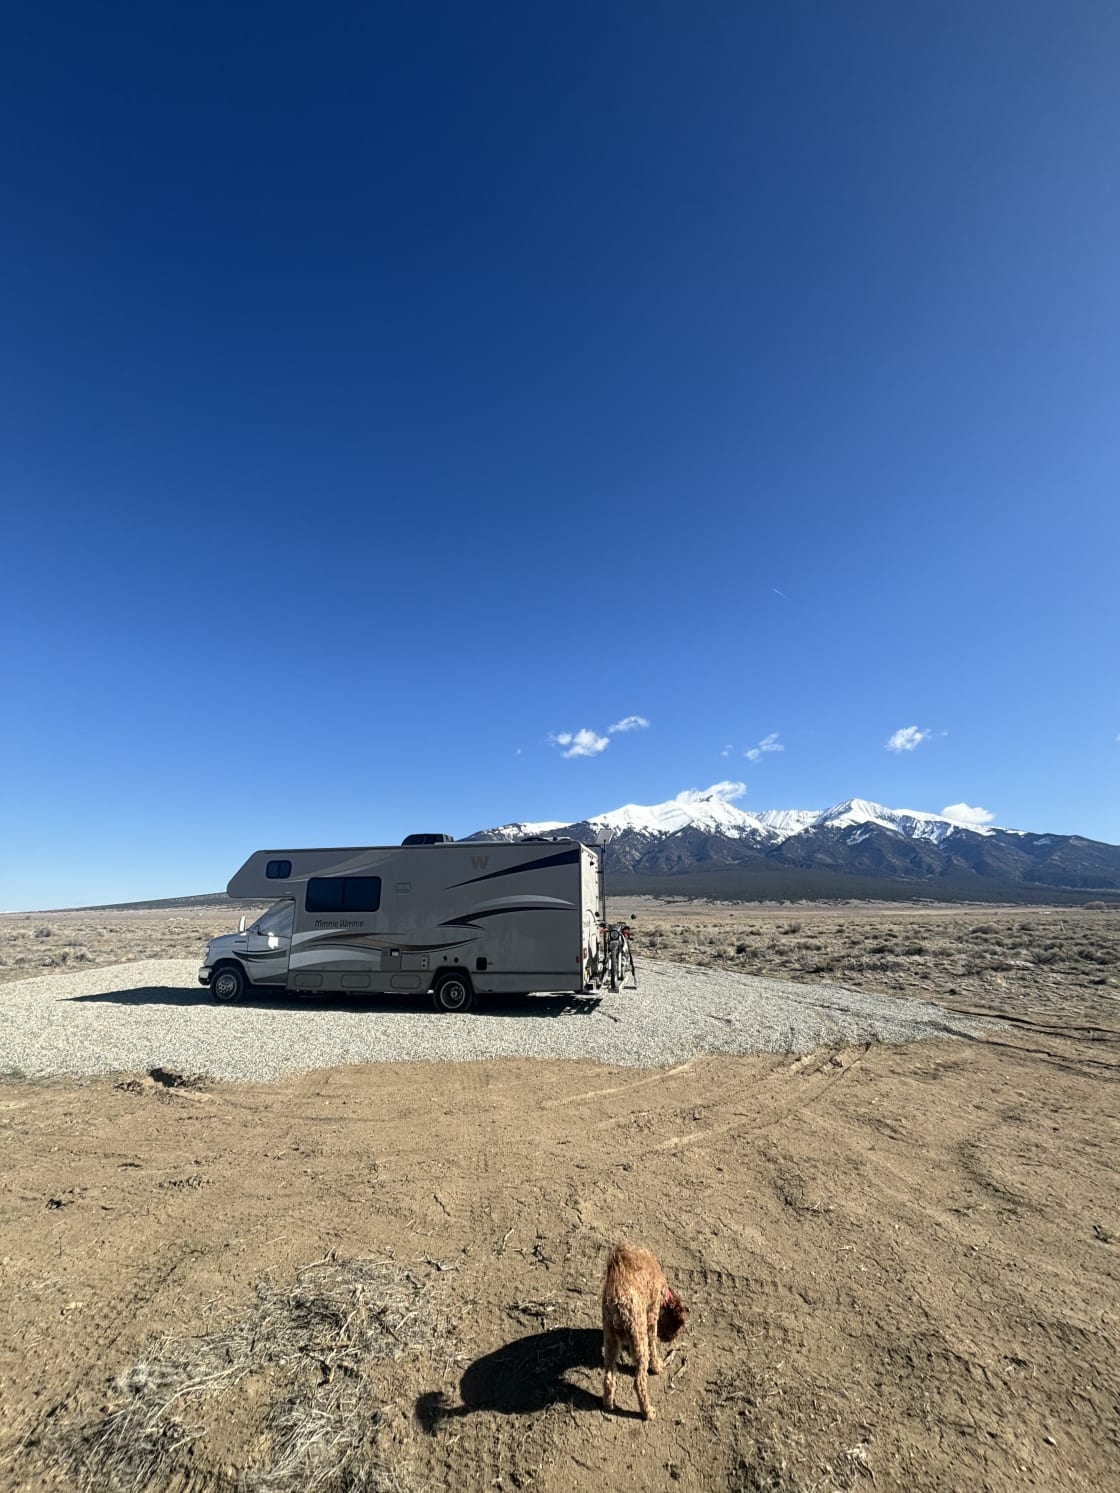 The White Shell Mountain Campground